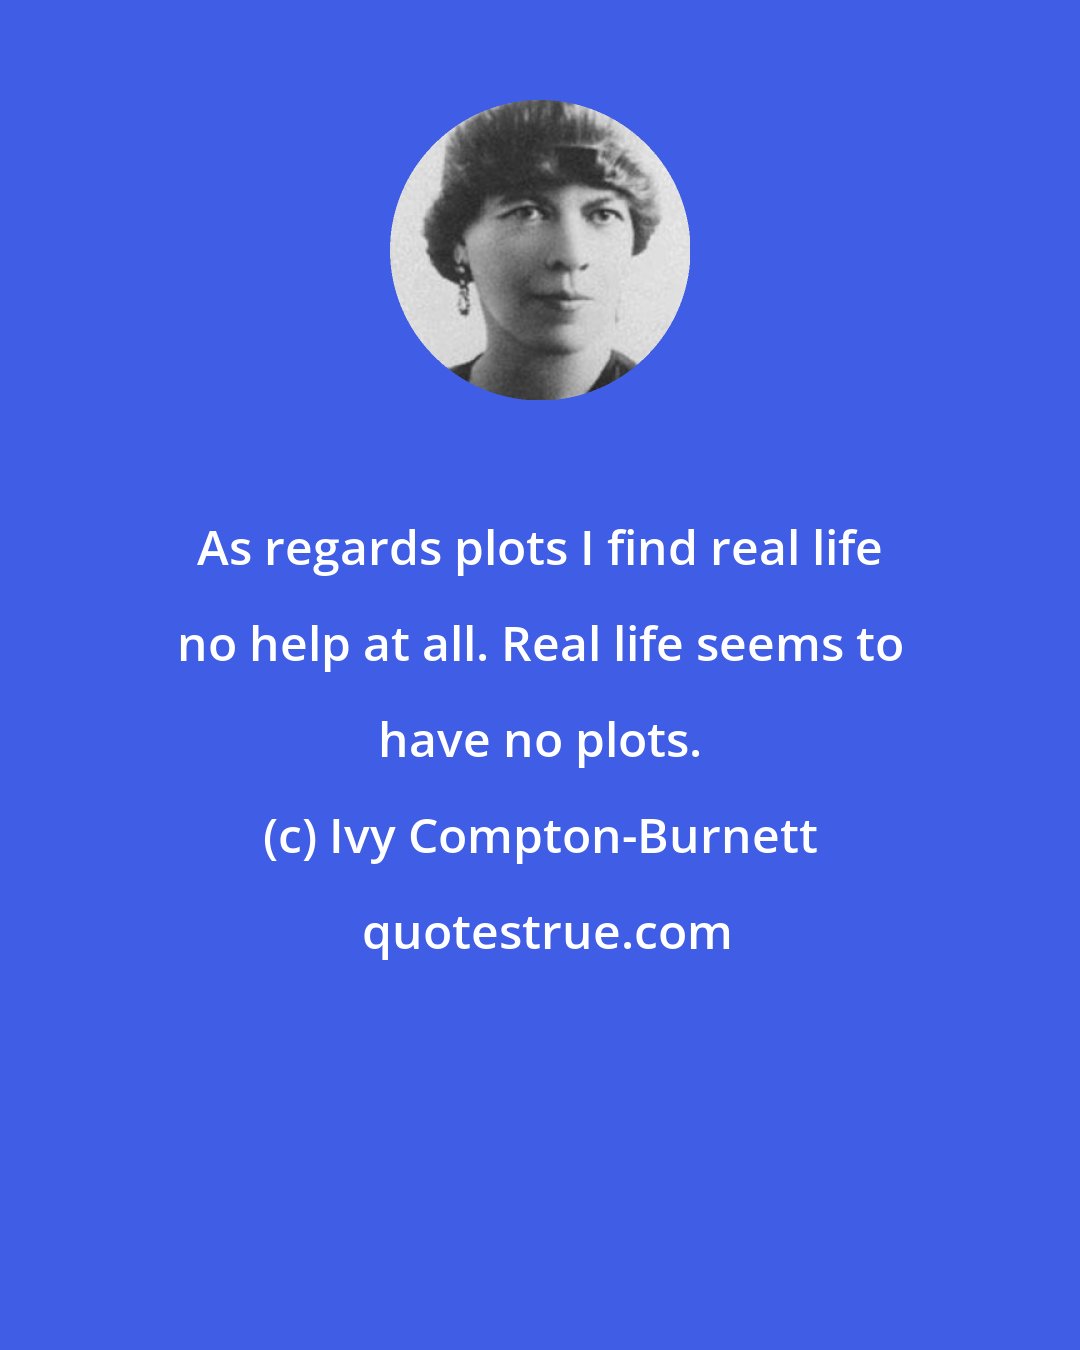 Ivy Compton-Burnett: As regards plots I find real life no help at all. Real life seems to have no plots.